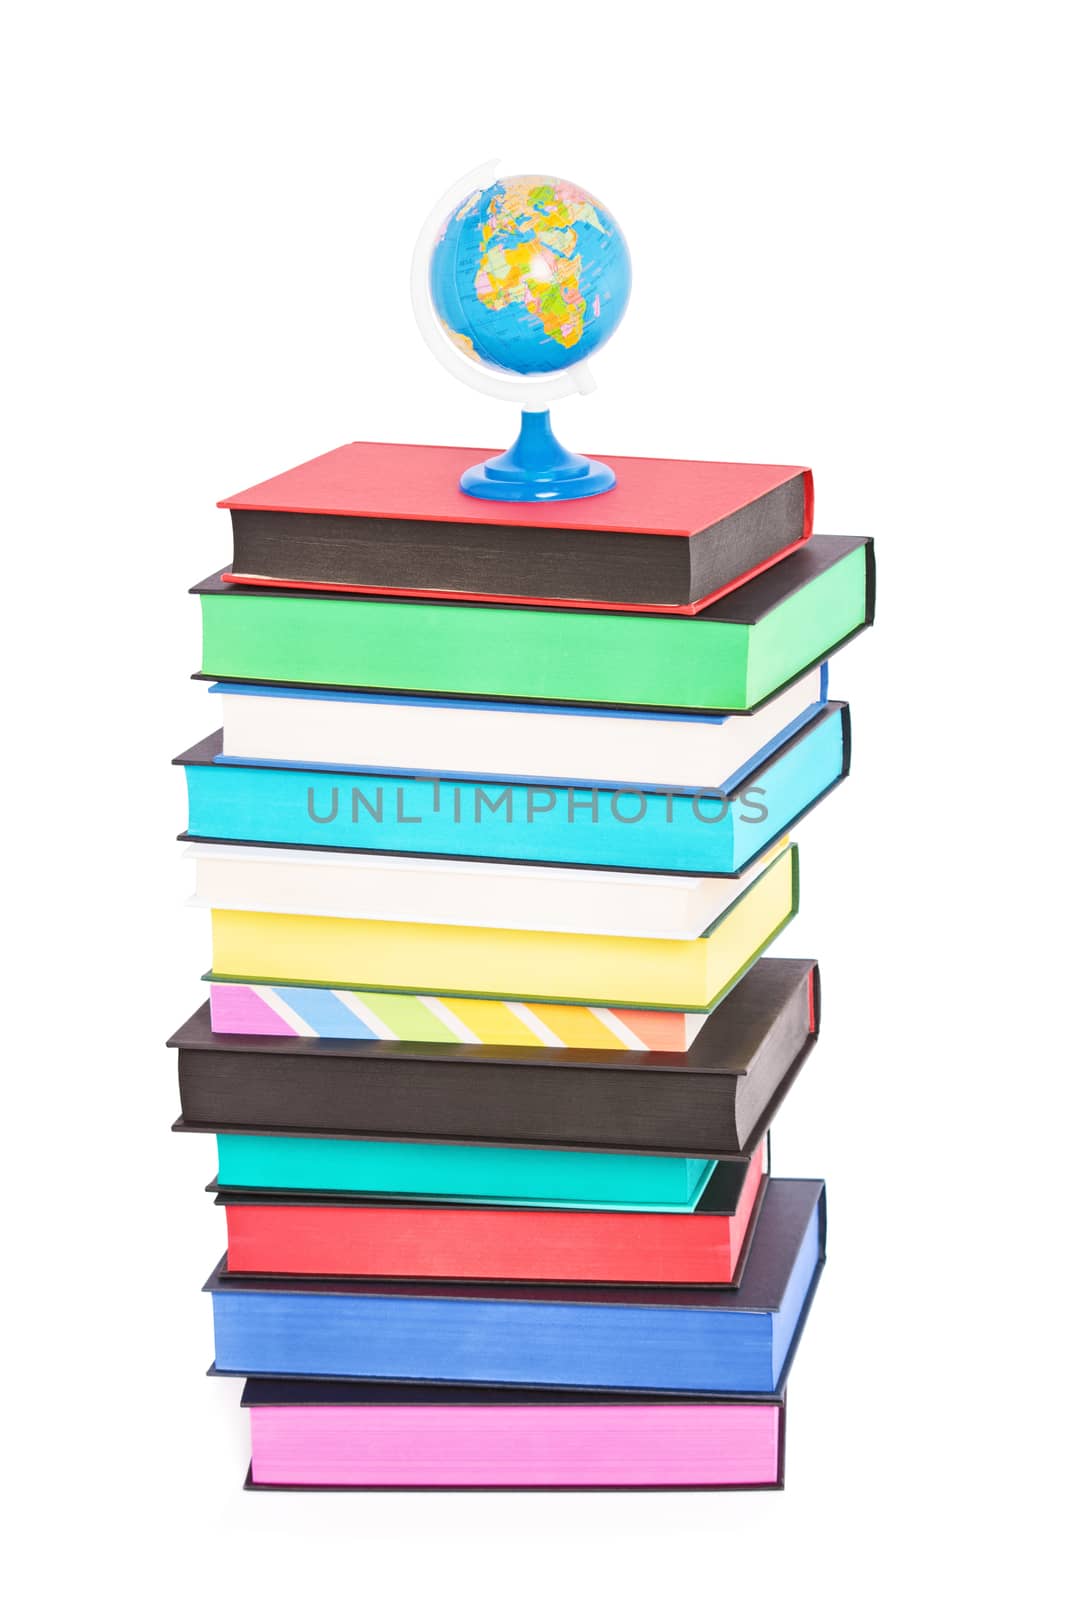 A globe on top of stack of colorful books by Mendelex